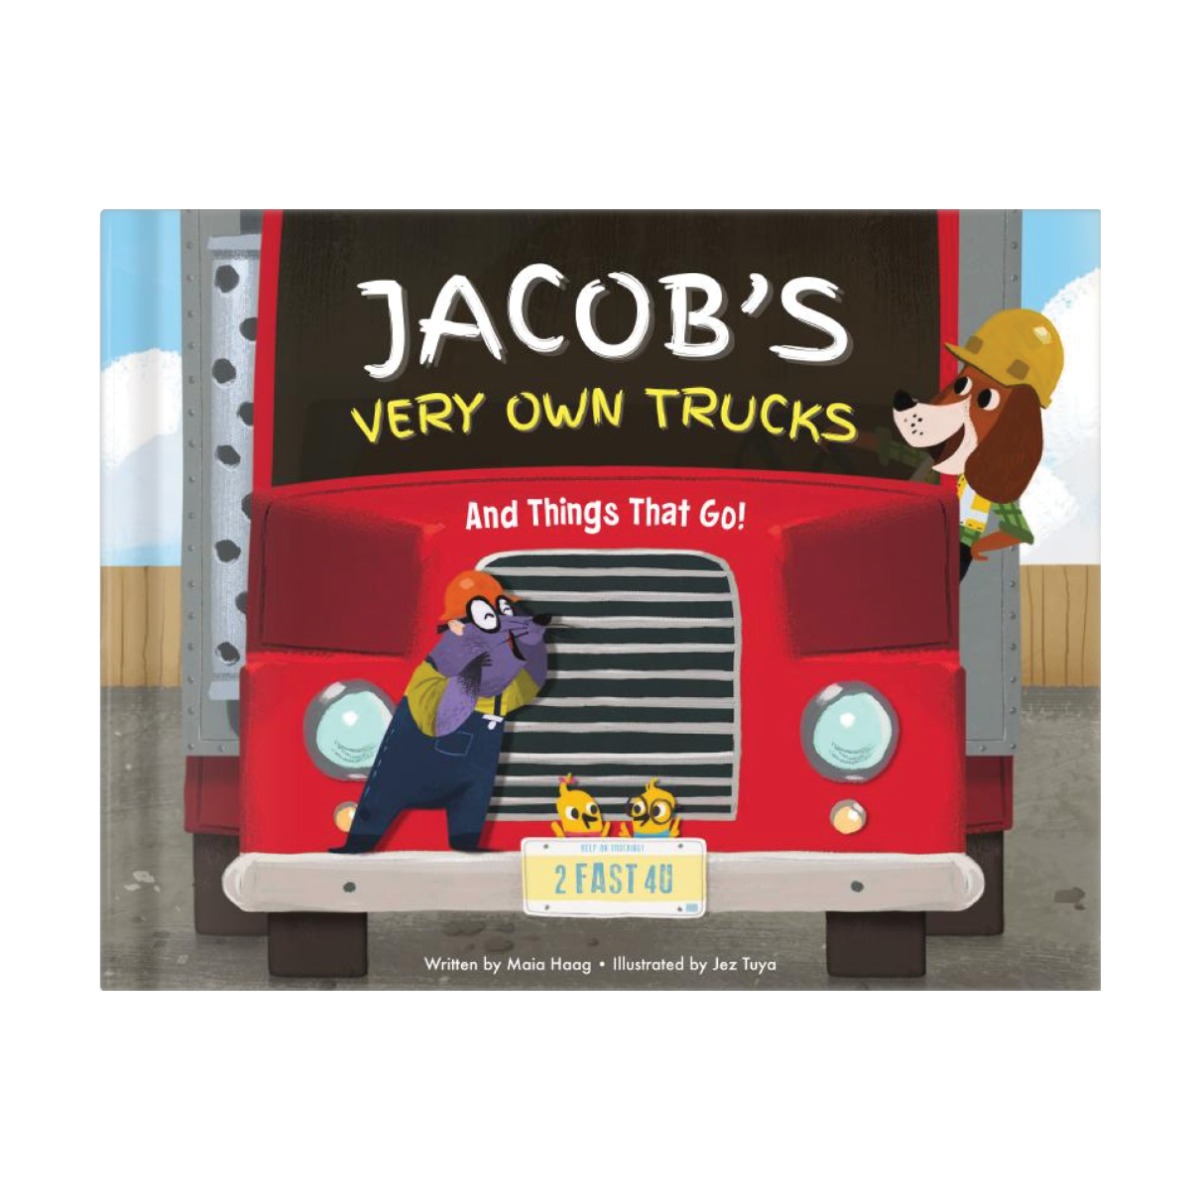 My Very Own Trucks Personalized Book and Ornament Gift Set